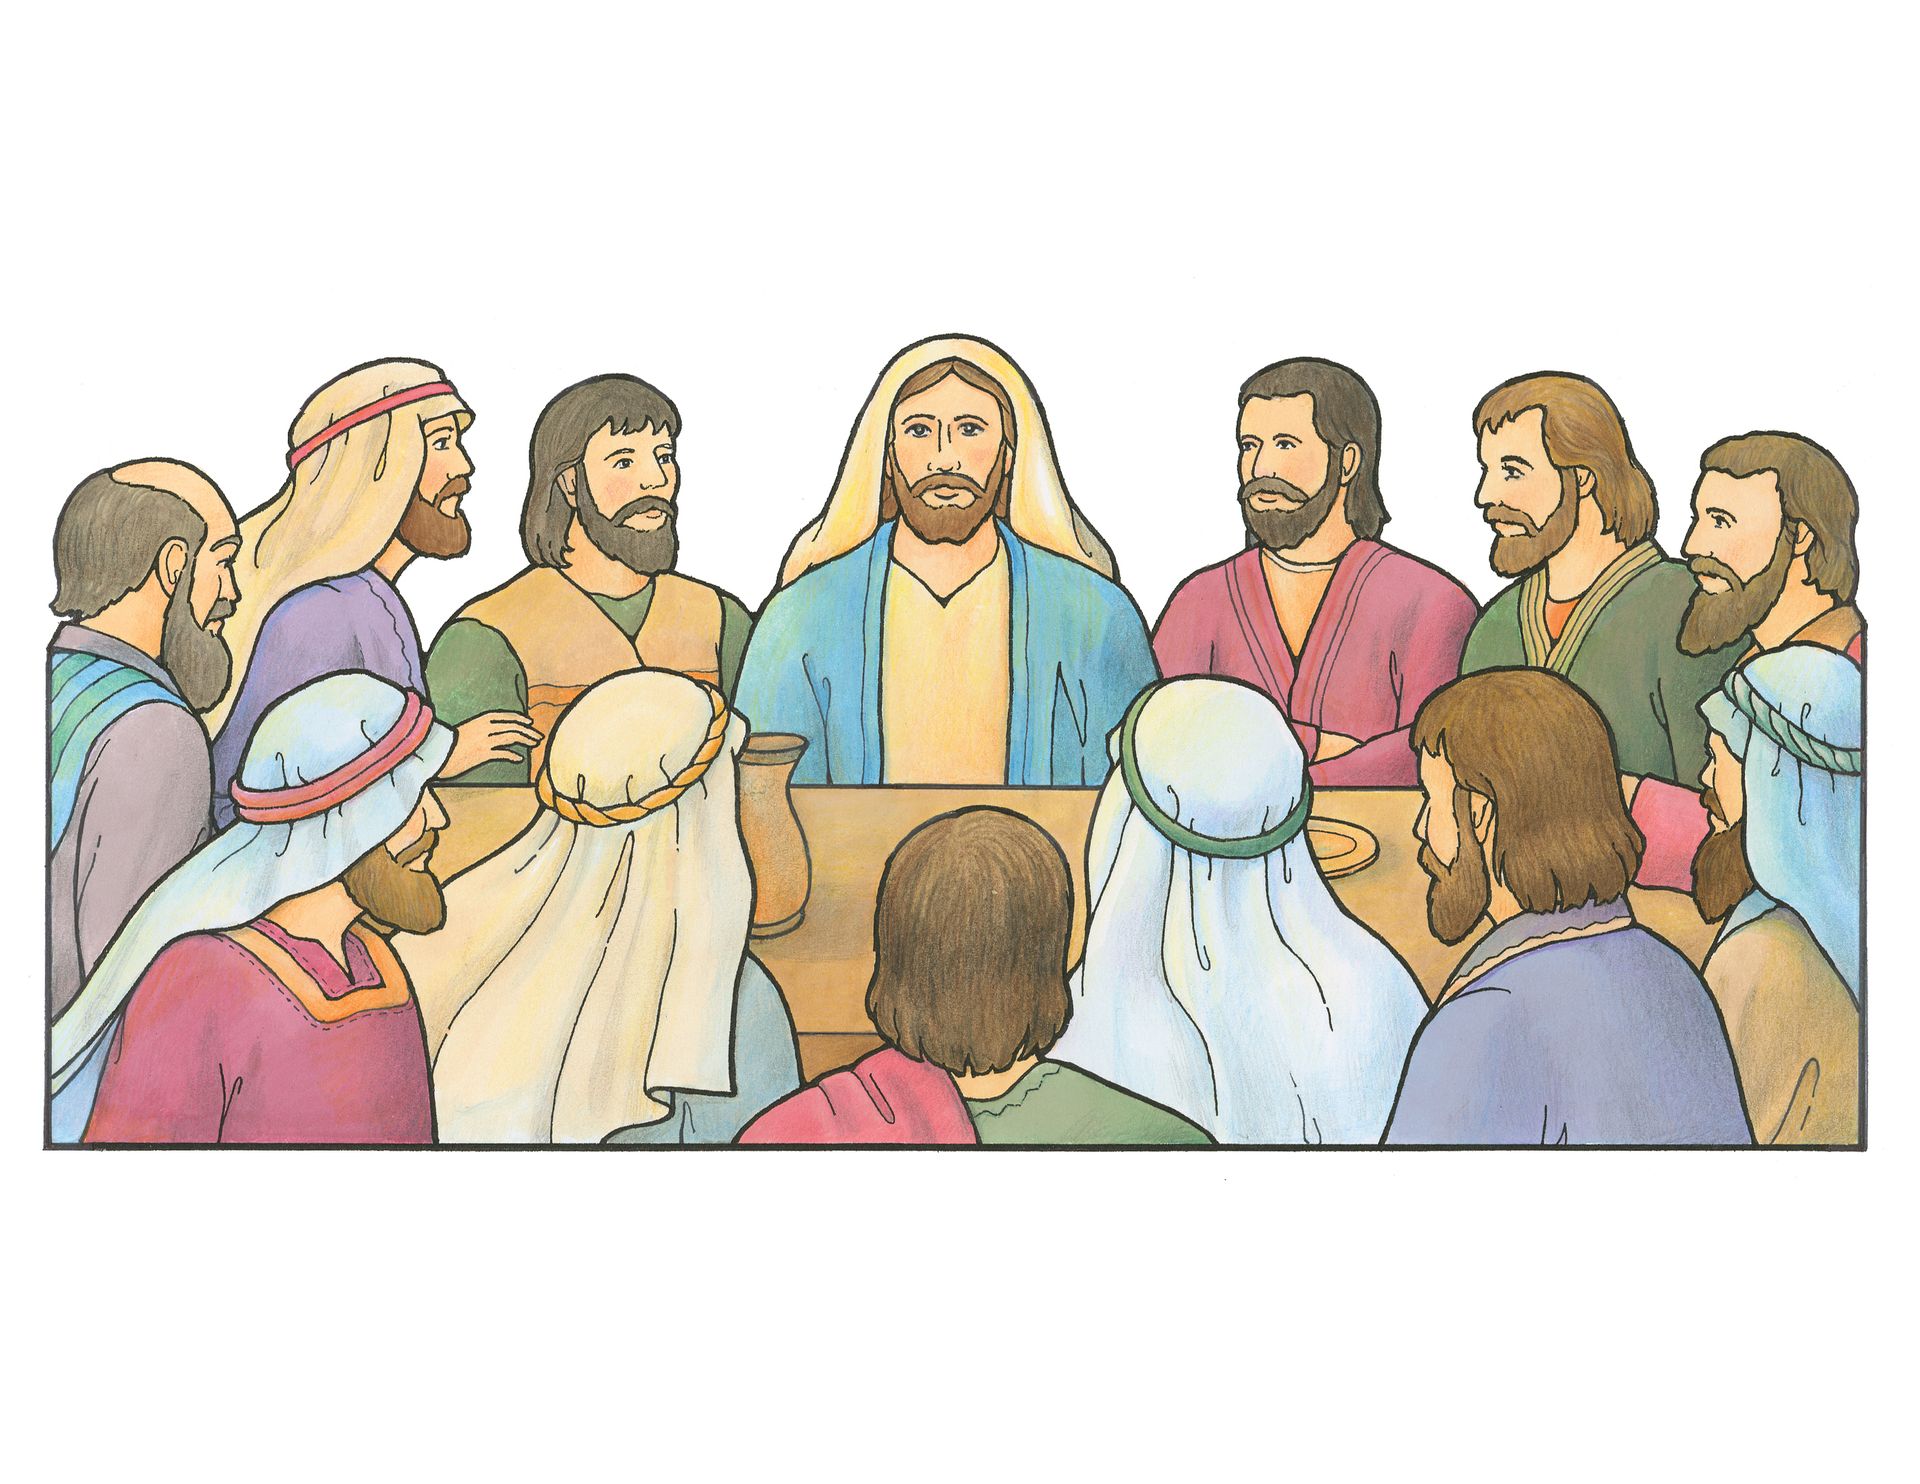 Jesus Christ sits with the Twelve Apostles around a table during the Last Supper.